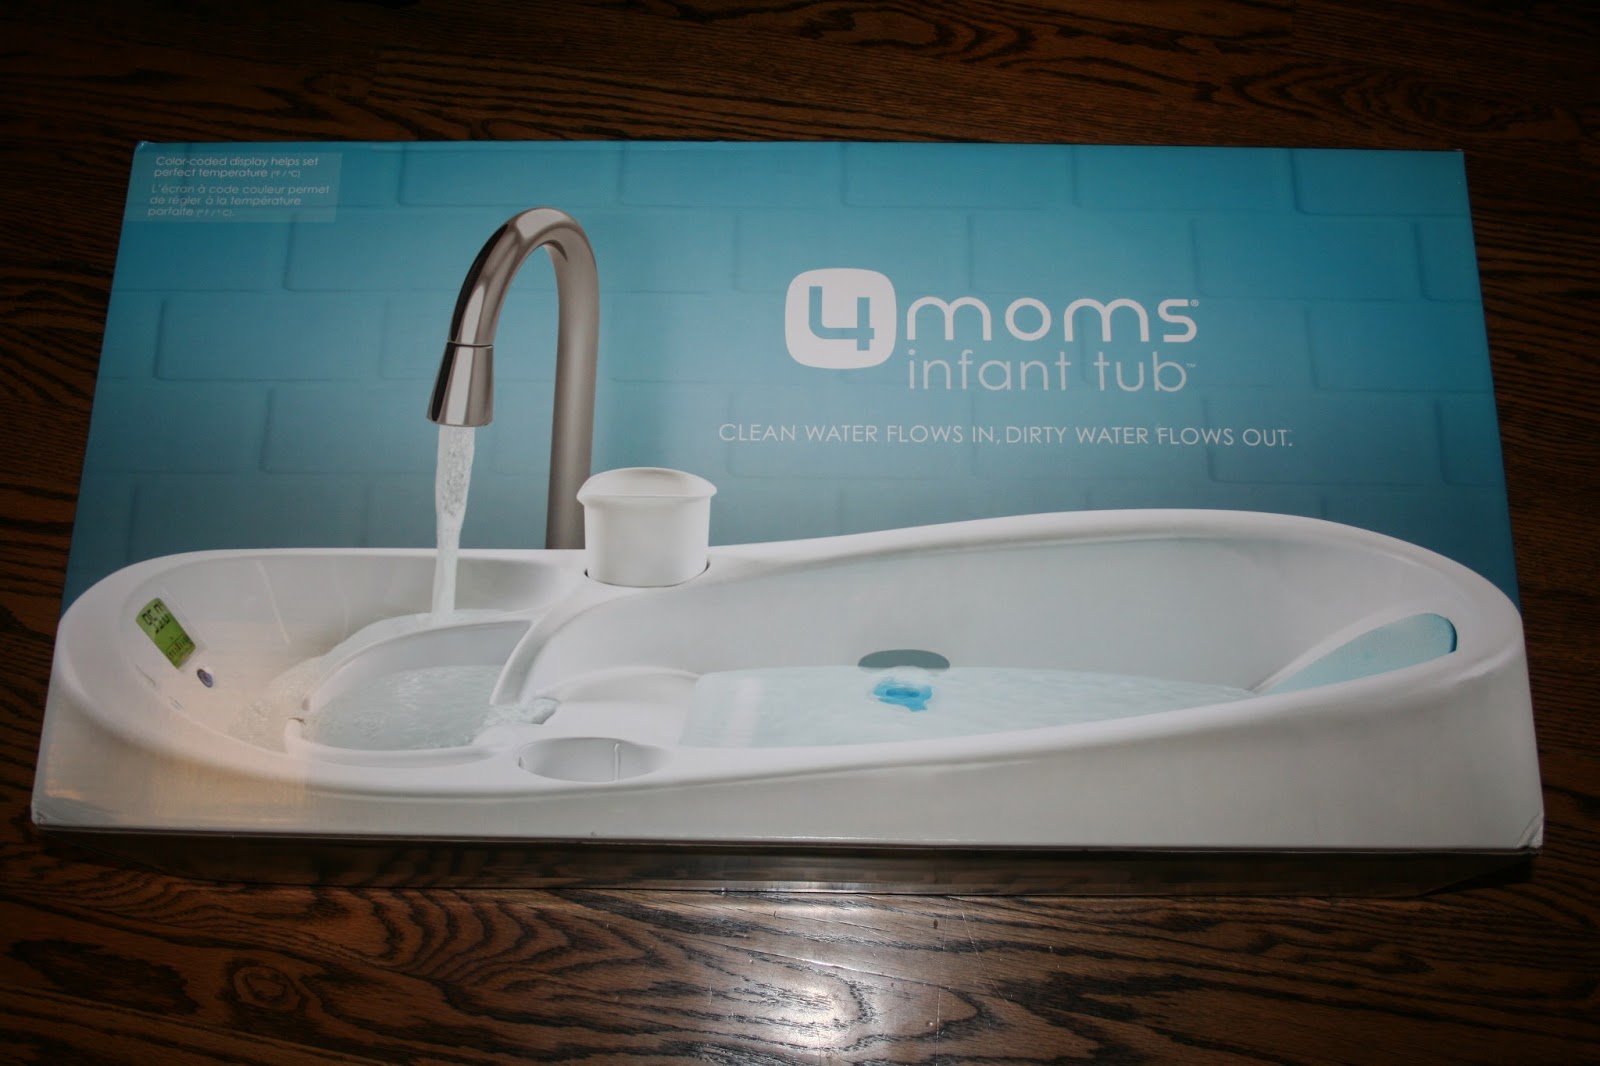 4moms Cleanwater Collection Bathtub Reviews Bathtub Designs